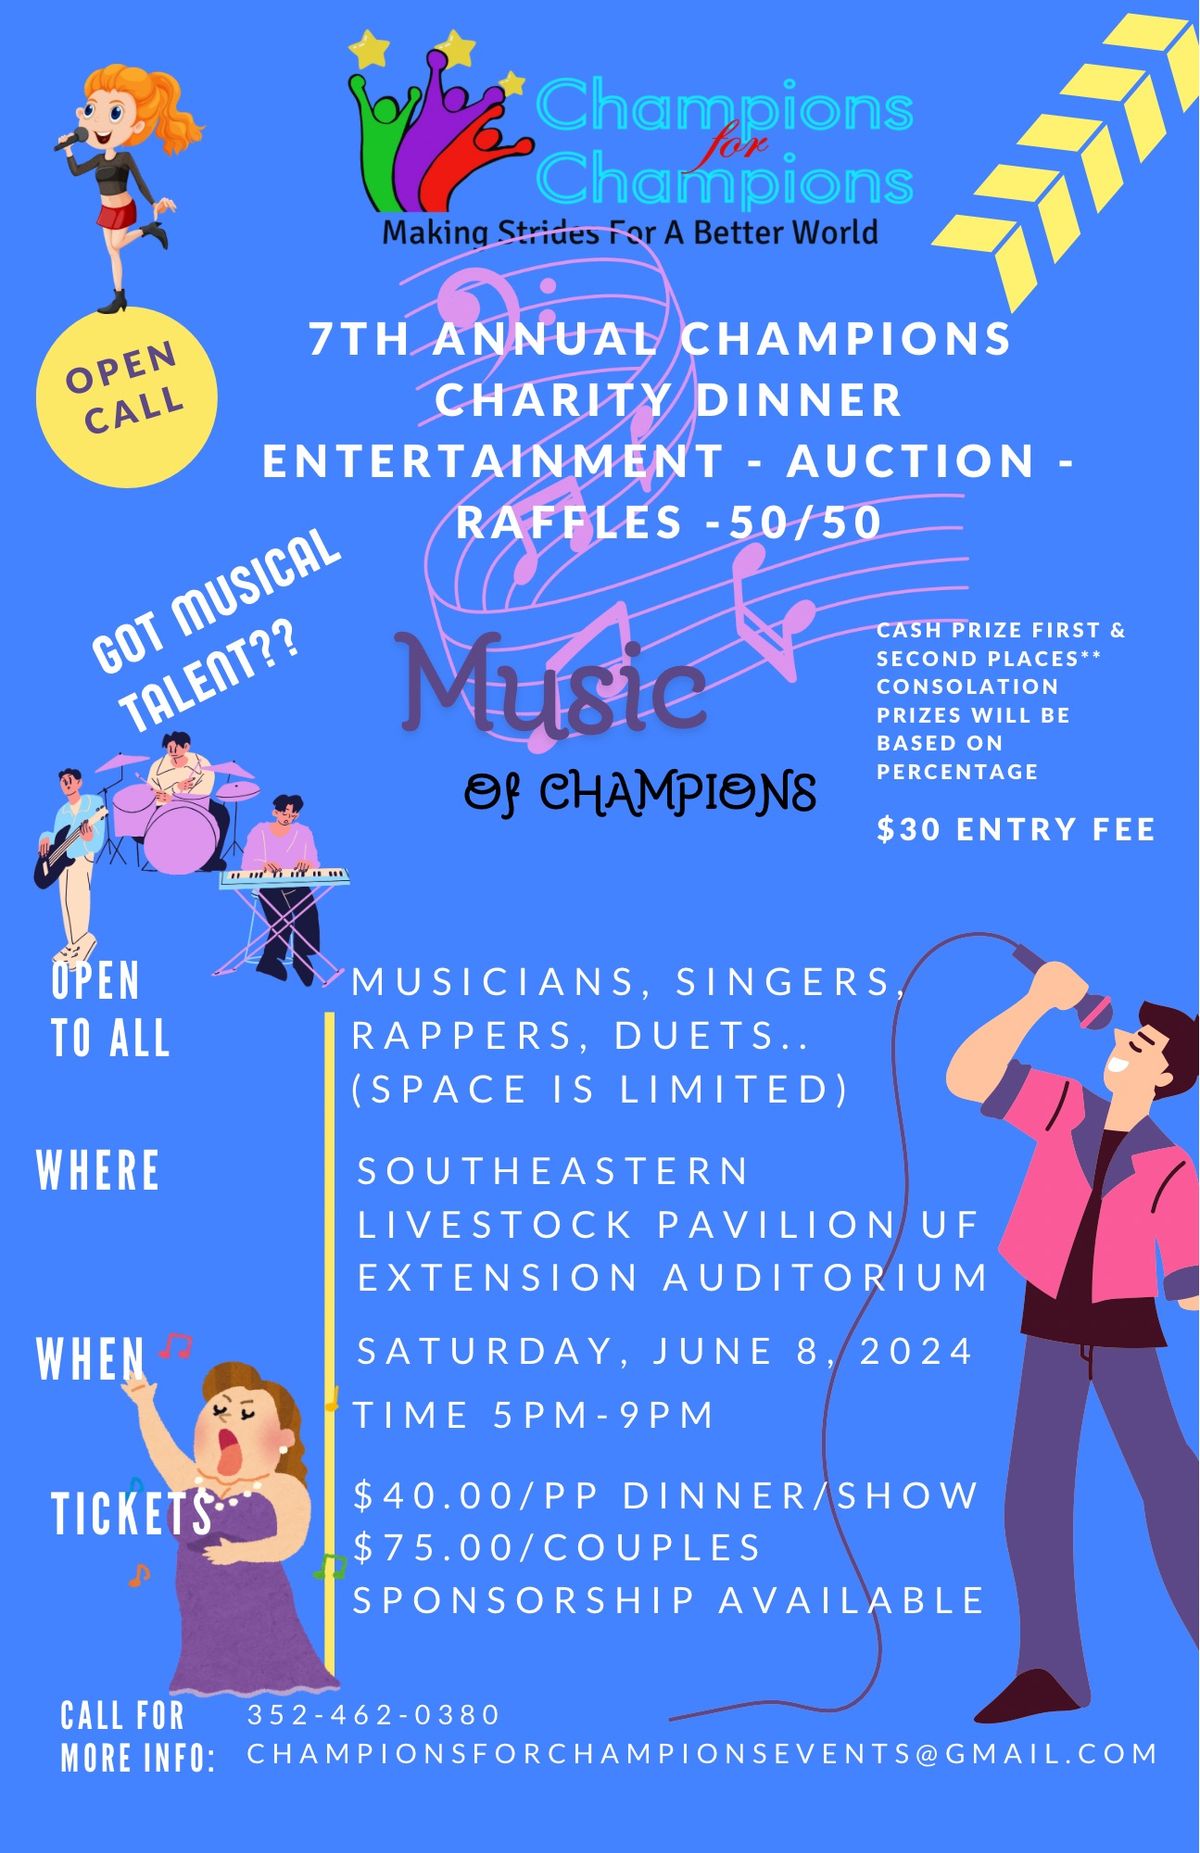 7th Champions Celebrity Charity Dinner - The Music of Champions Ultimate Showdown